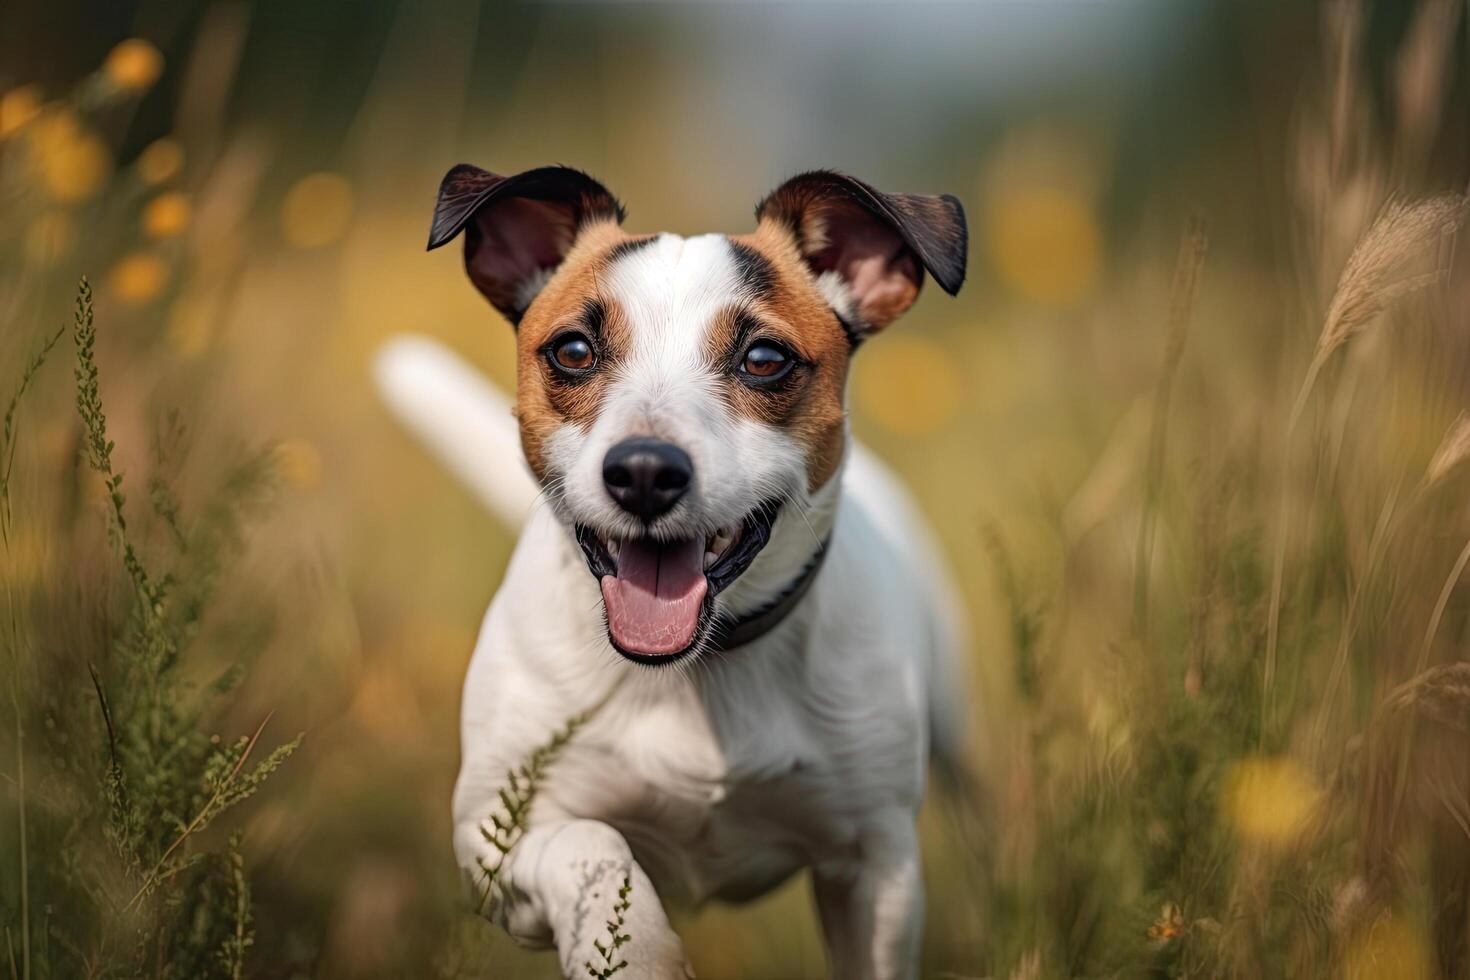 Jack Russell Terrier running in the field. Portrait of a Dog photo